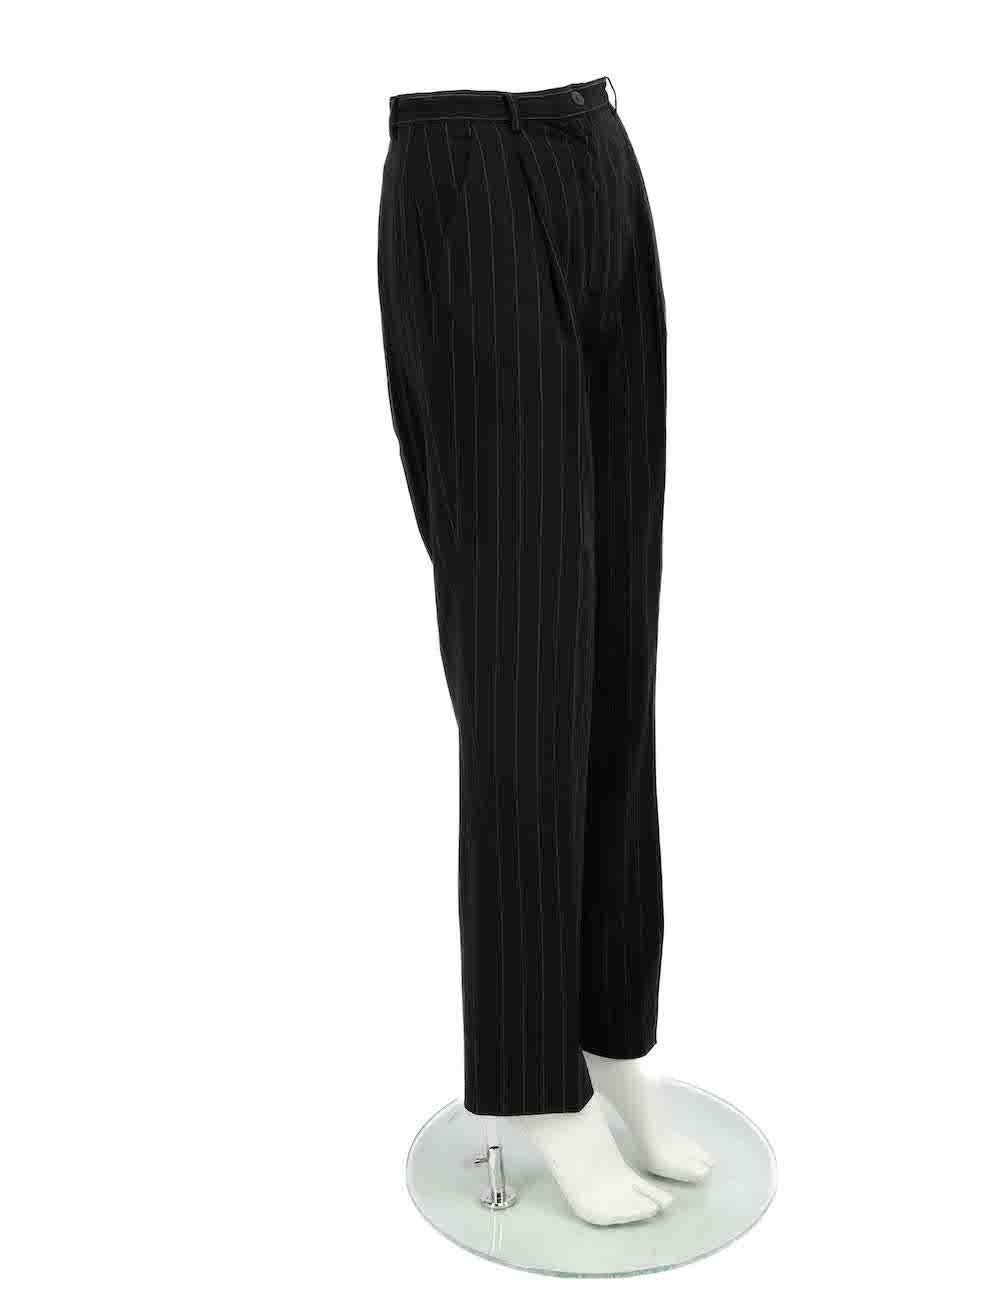 CONDITION is Very good. Hardly any visible wear to trousers is evident on this used Escada designer resale item.
 
 
 
 Details
 
 
 Black
 
 Wool
 
 Trousers
 
 Pinstripe pattern
 
 Straight fit
 
 High rise
 
 2x Side pockets
 
 Fly zip and button